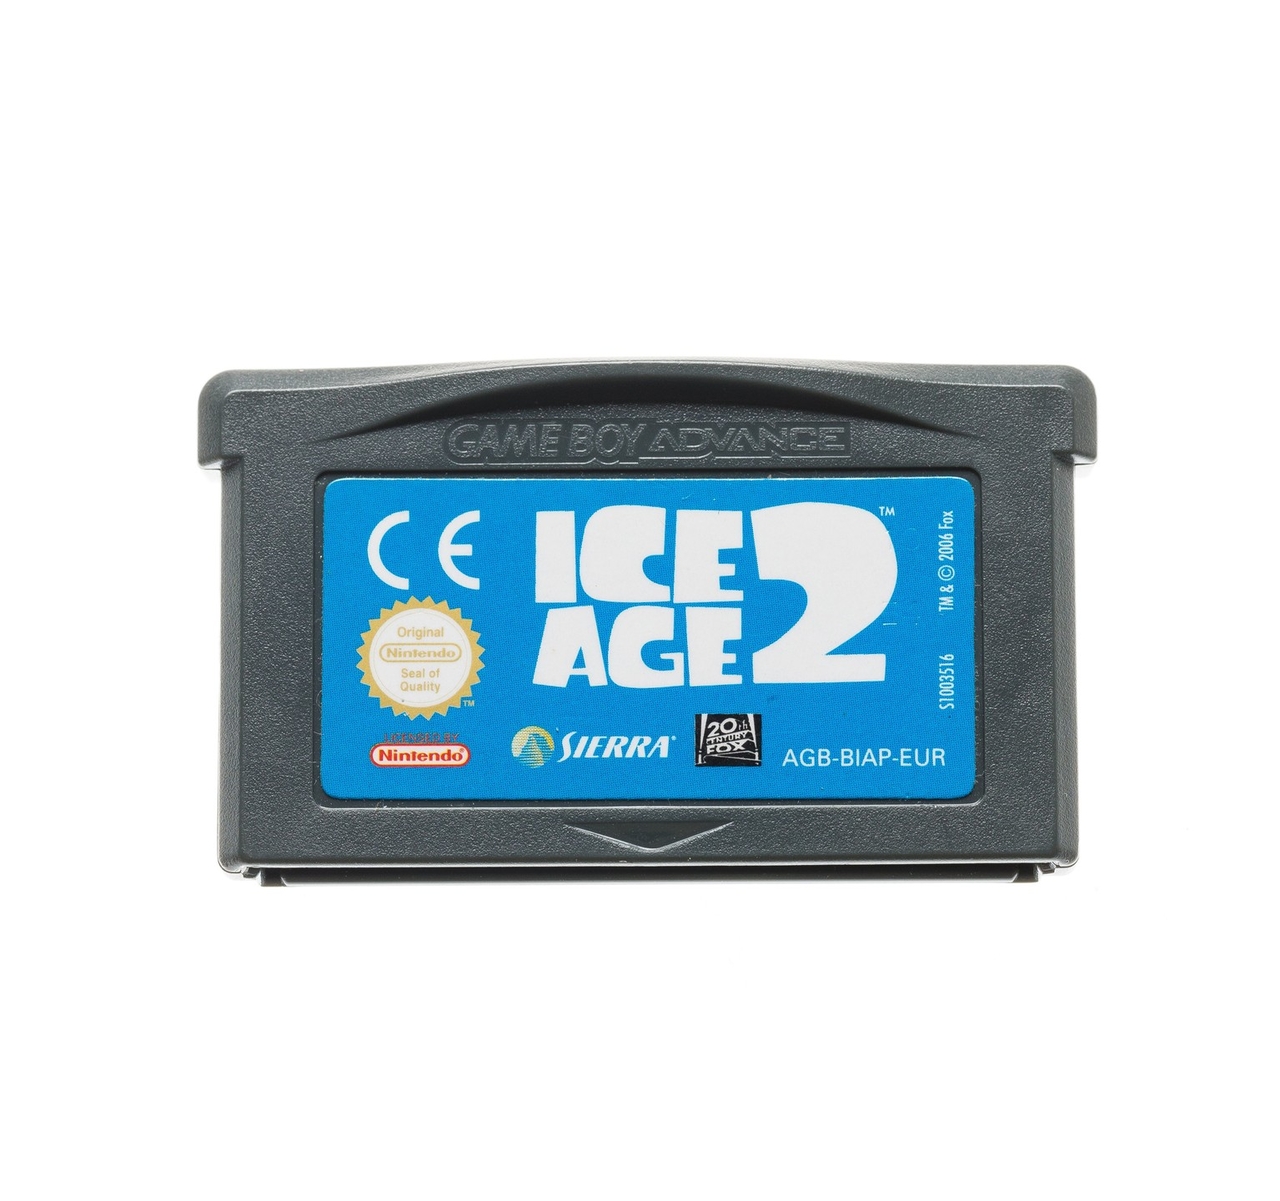 Ice Age 2 Kopen | Gameboy Advance Games